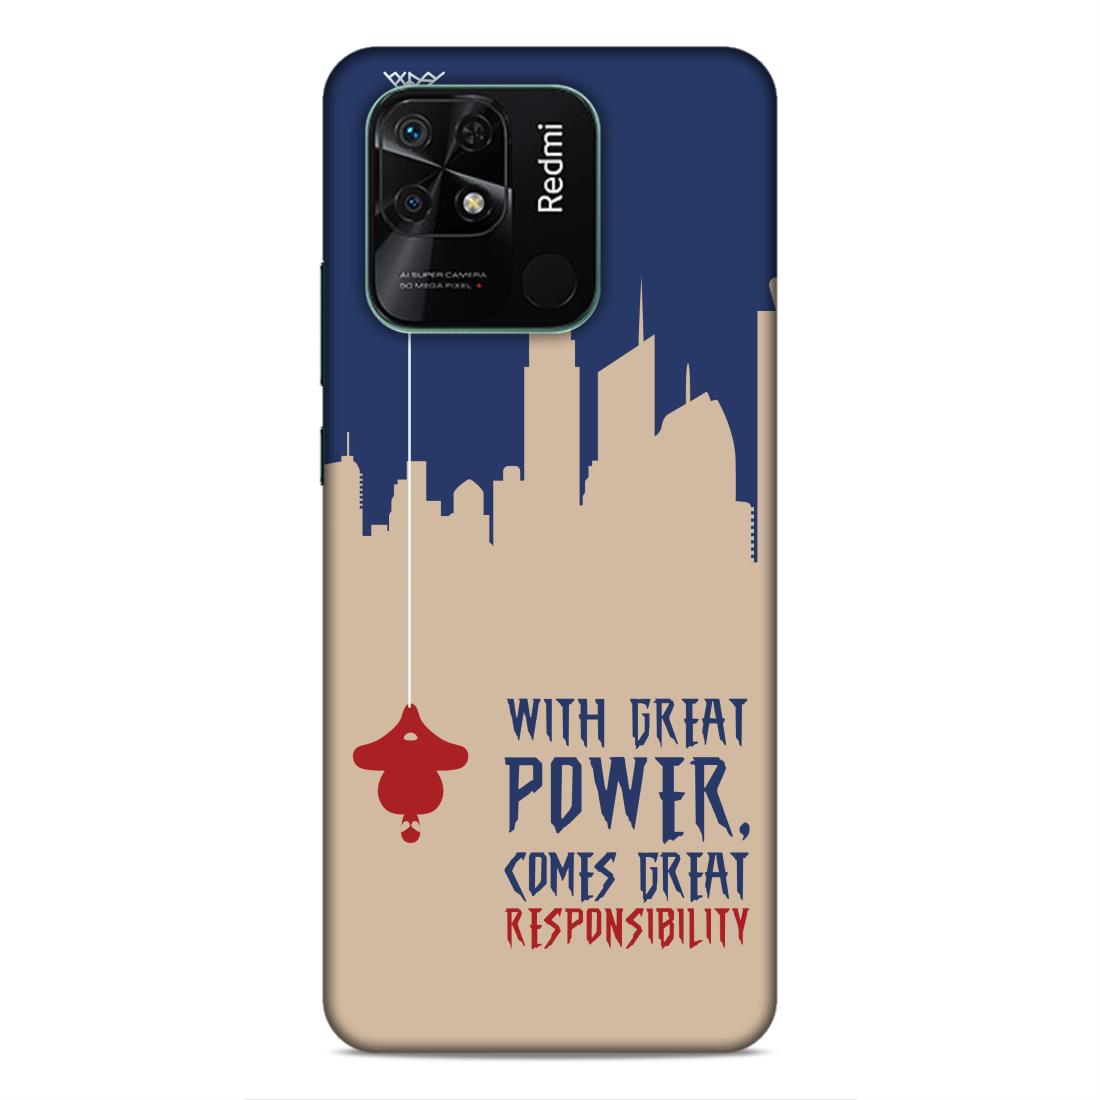 Great Power Comes Great Responsibility Hard Back Case For Xiaomi Redmi 10 / 10C / 10 Power